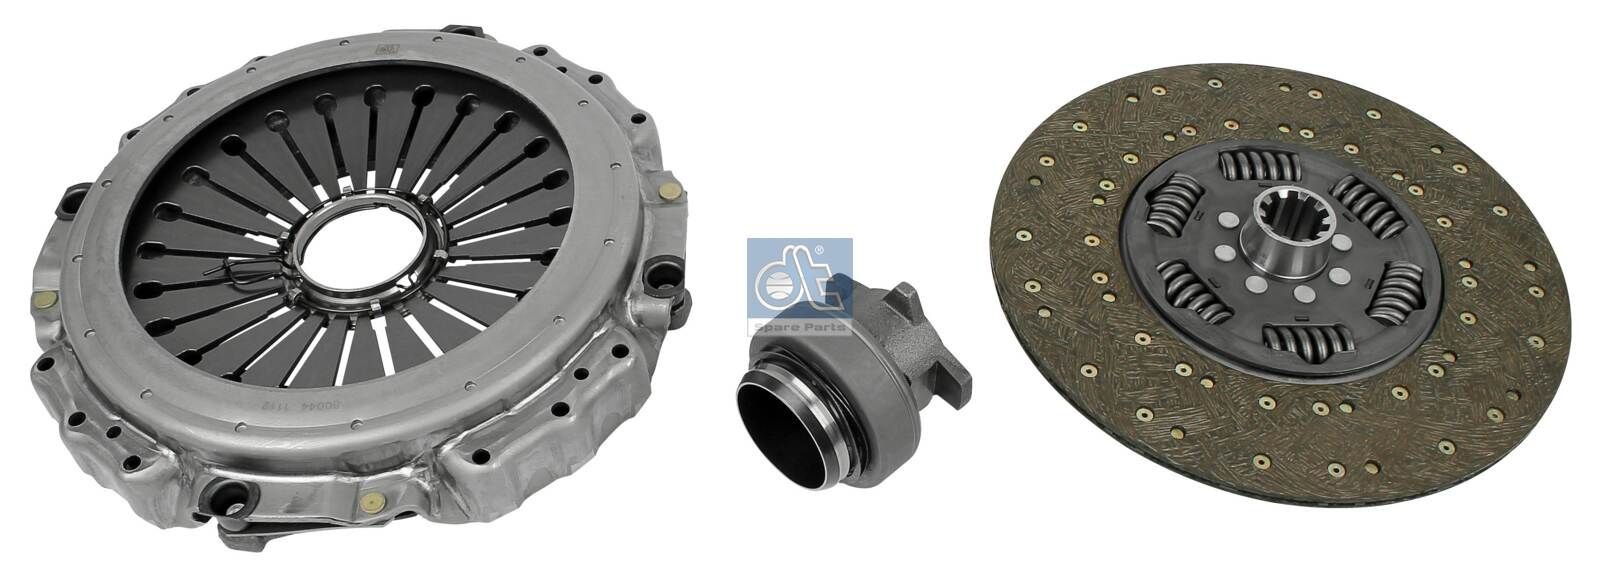 3400 122 101 DT Spare Parts 430mm Ø: 430mm Clutch replacement kit 5.95000 buy